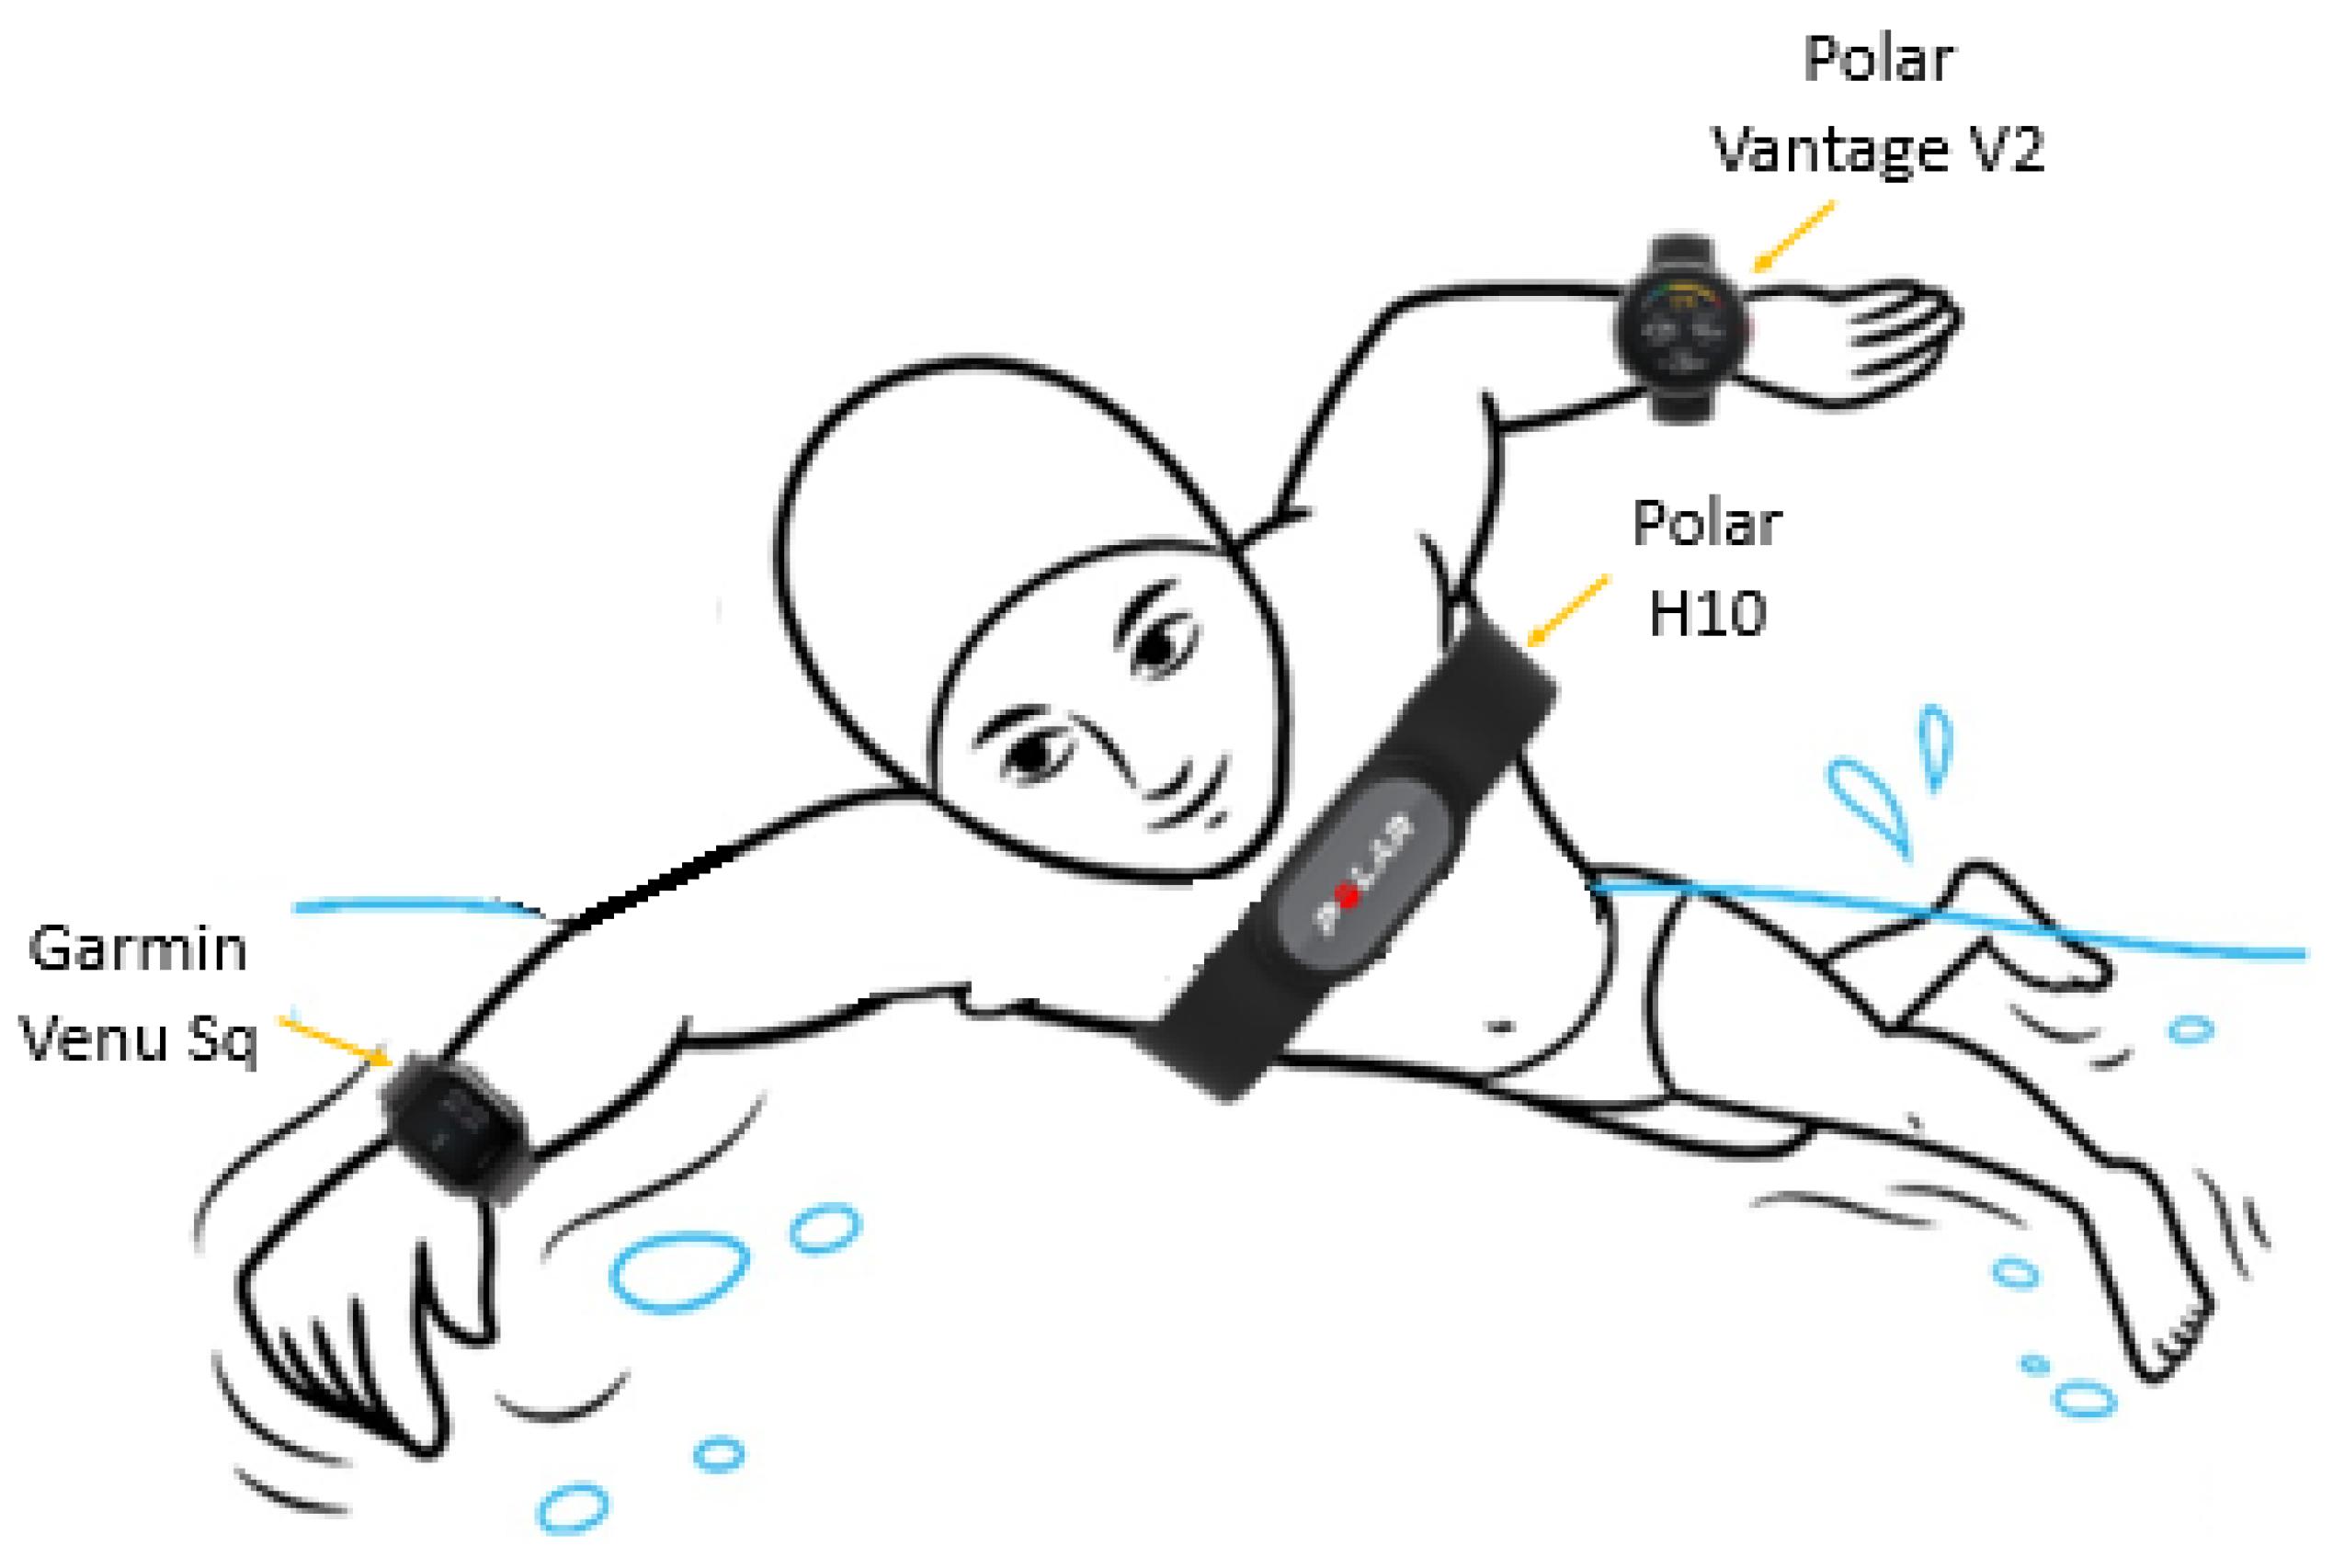 Polar H10 Scientific Review: Best for Heart Rate (99.6% Accurate